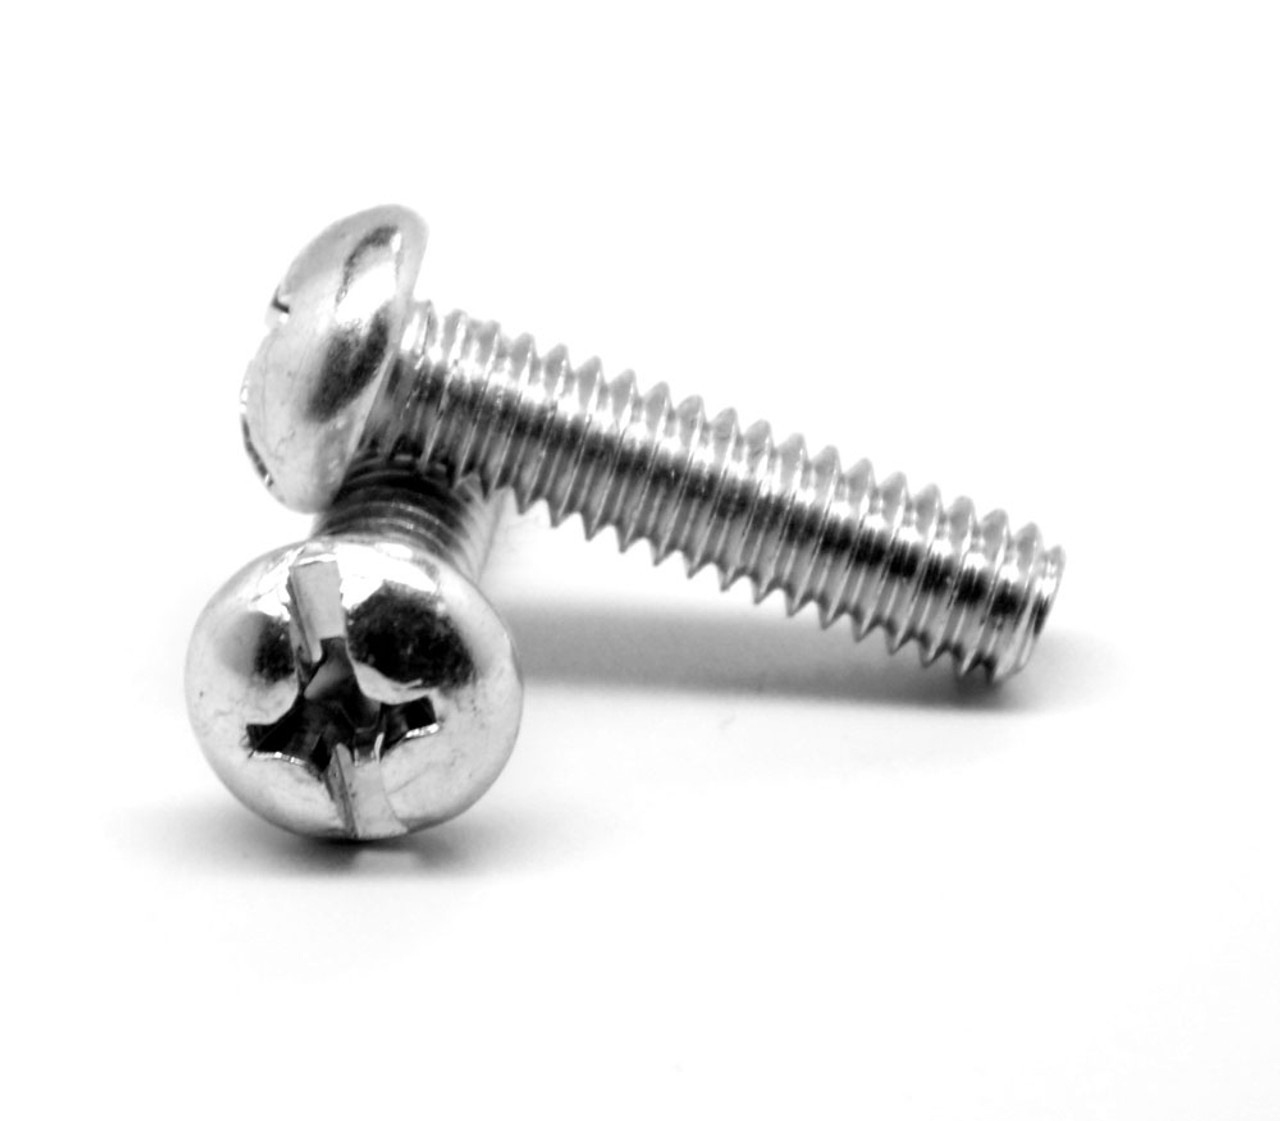 #4-40 x 3/8" (FT) Coarse Thread Machine Screw Combo (Phillips/Slotted) Pan Head Low Carbon Steel Zinc Plated